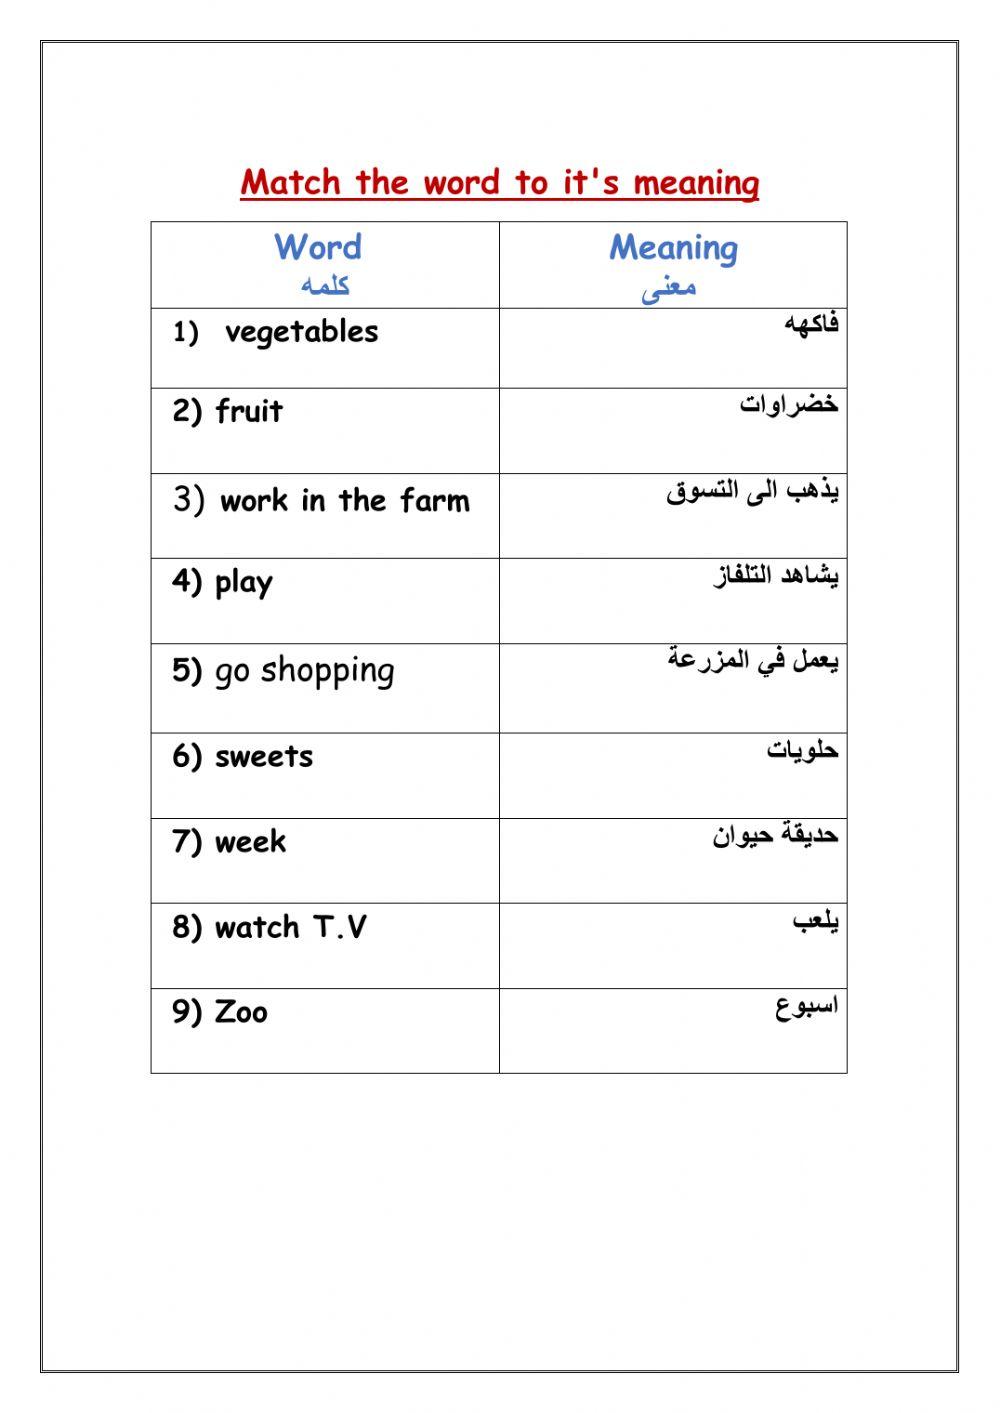 homework 213 t8 match the meanings